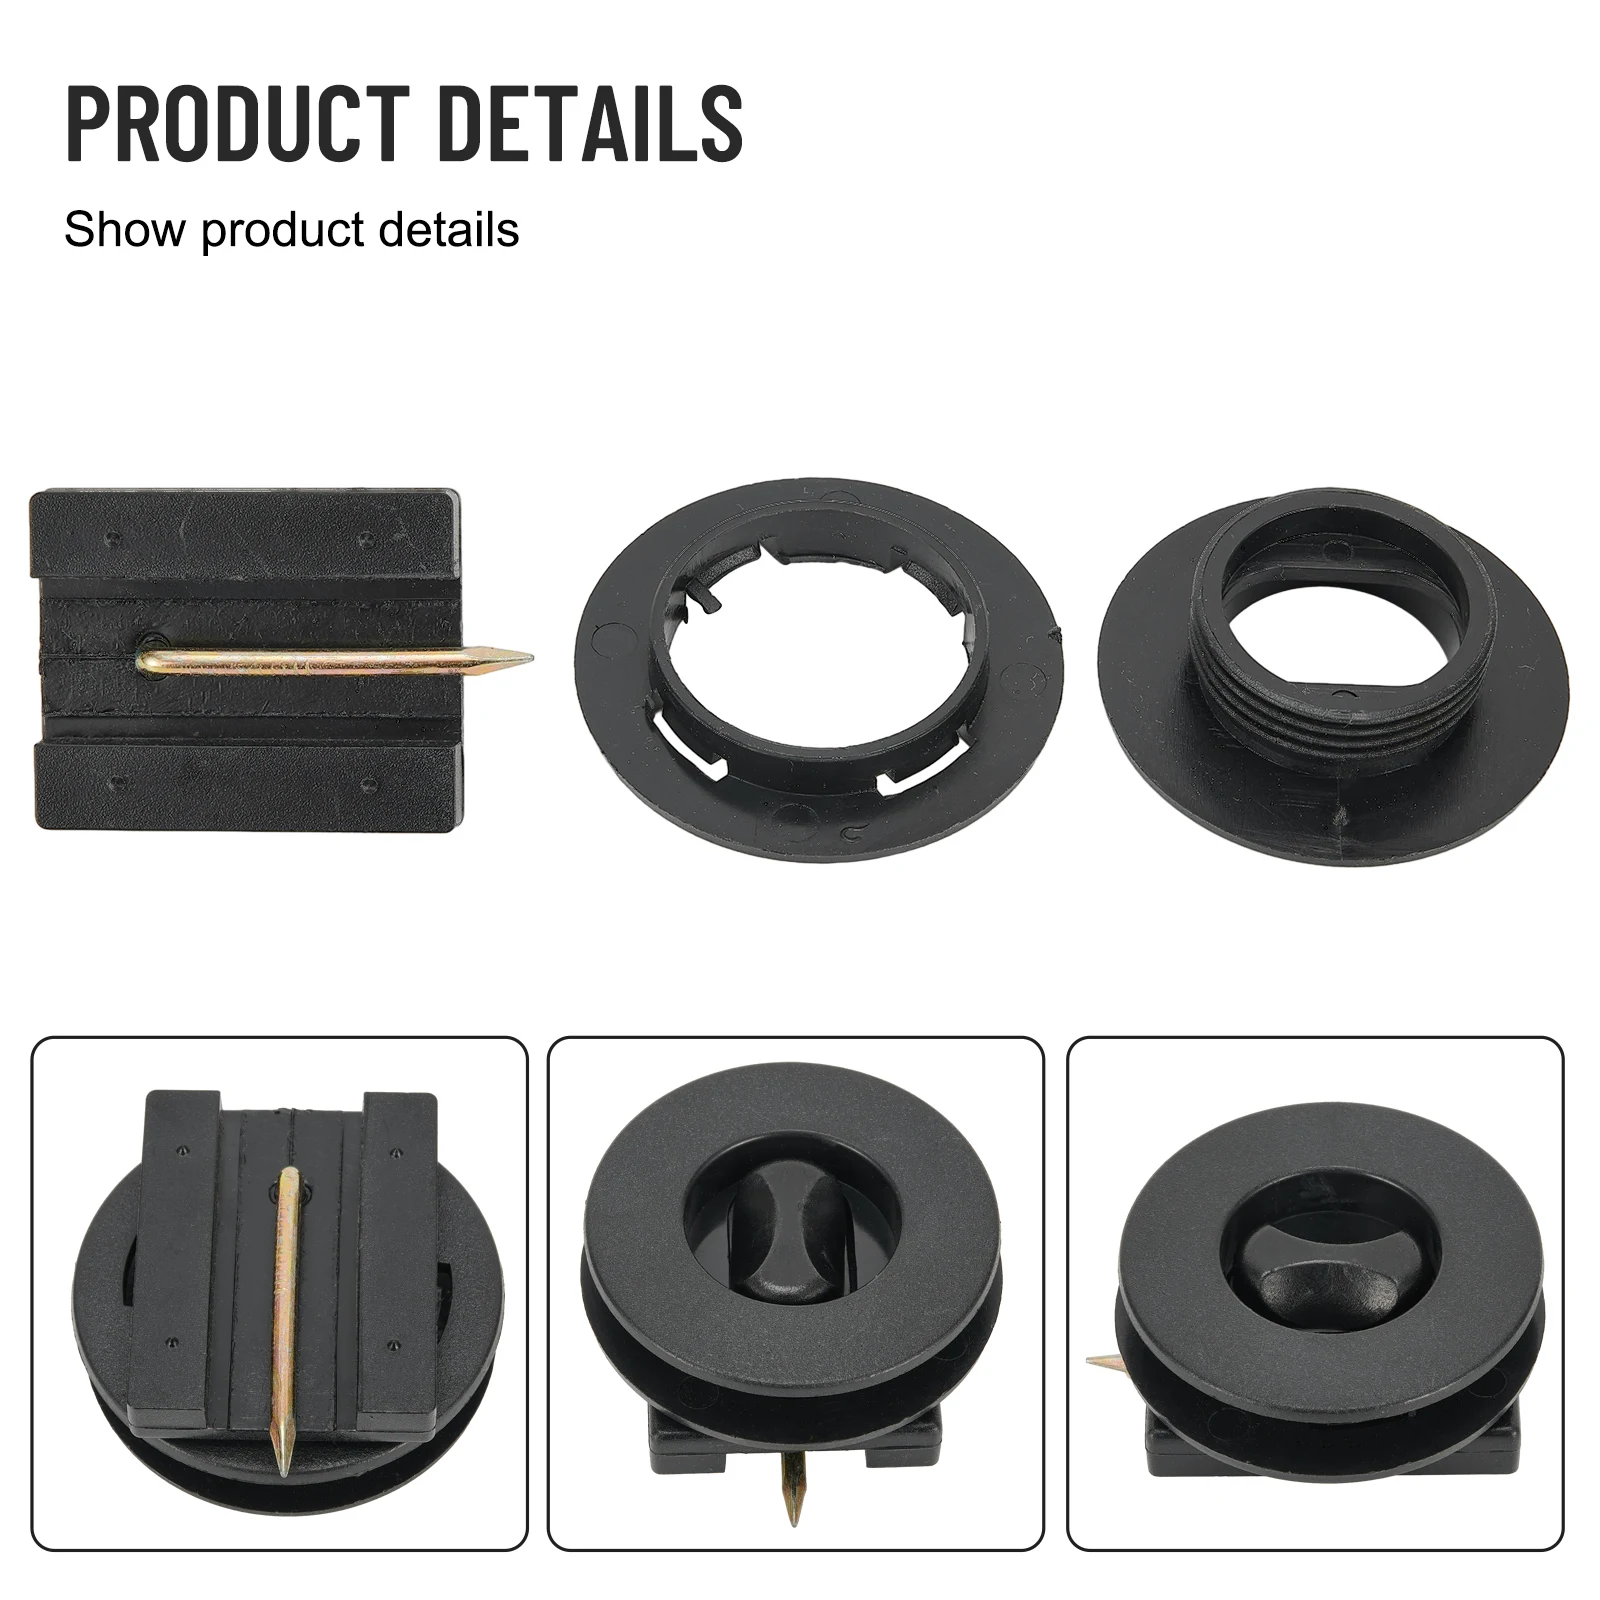 High Quality Brand New Durable Clips Easy To Install Tool Universal 4 Pcs Black EBay Motors Vintage Car&Truck Parts